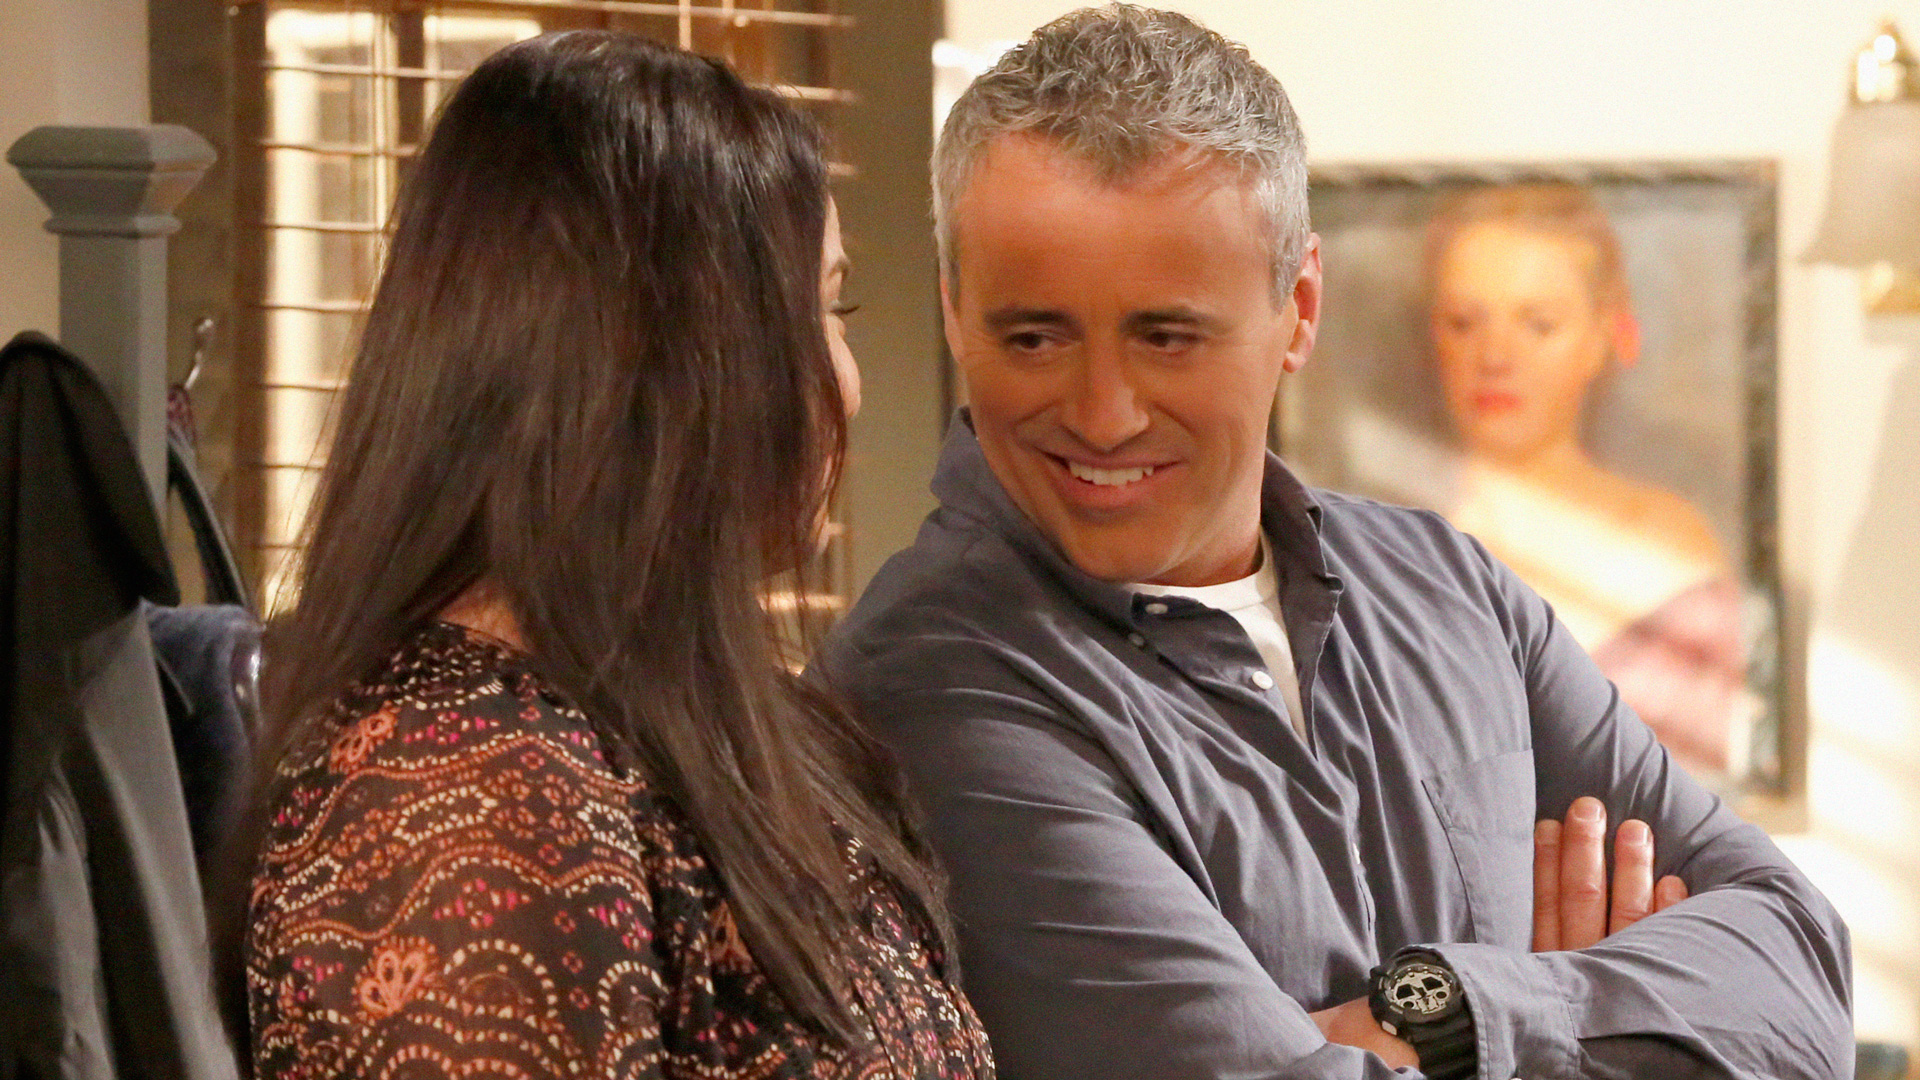 This grey-haired guy only has eyes for one lucky lady—Andi.